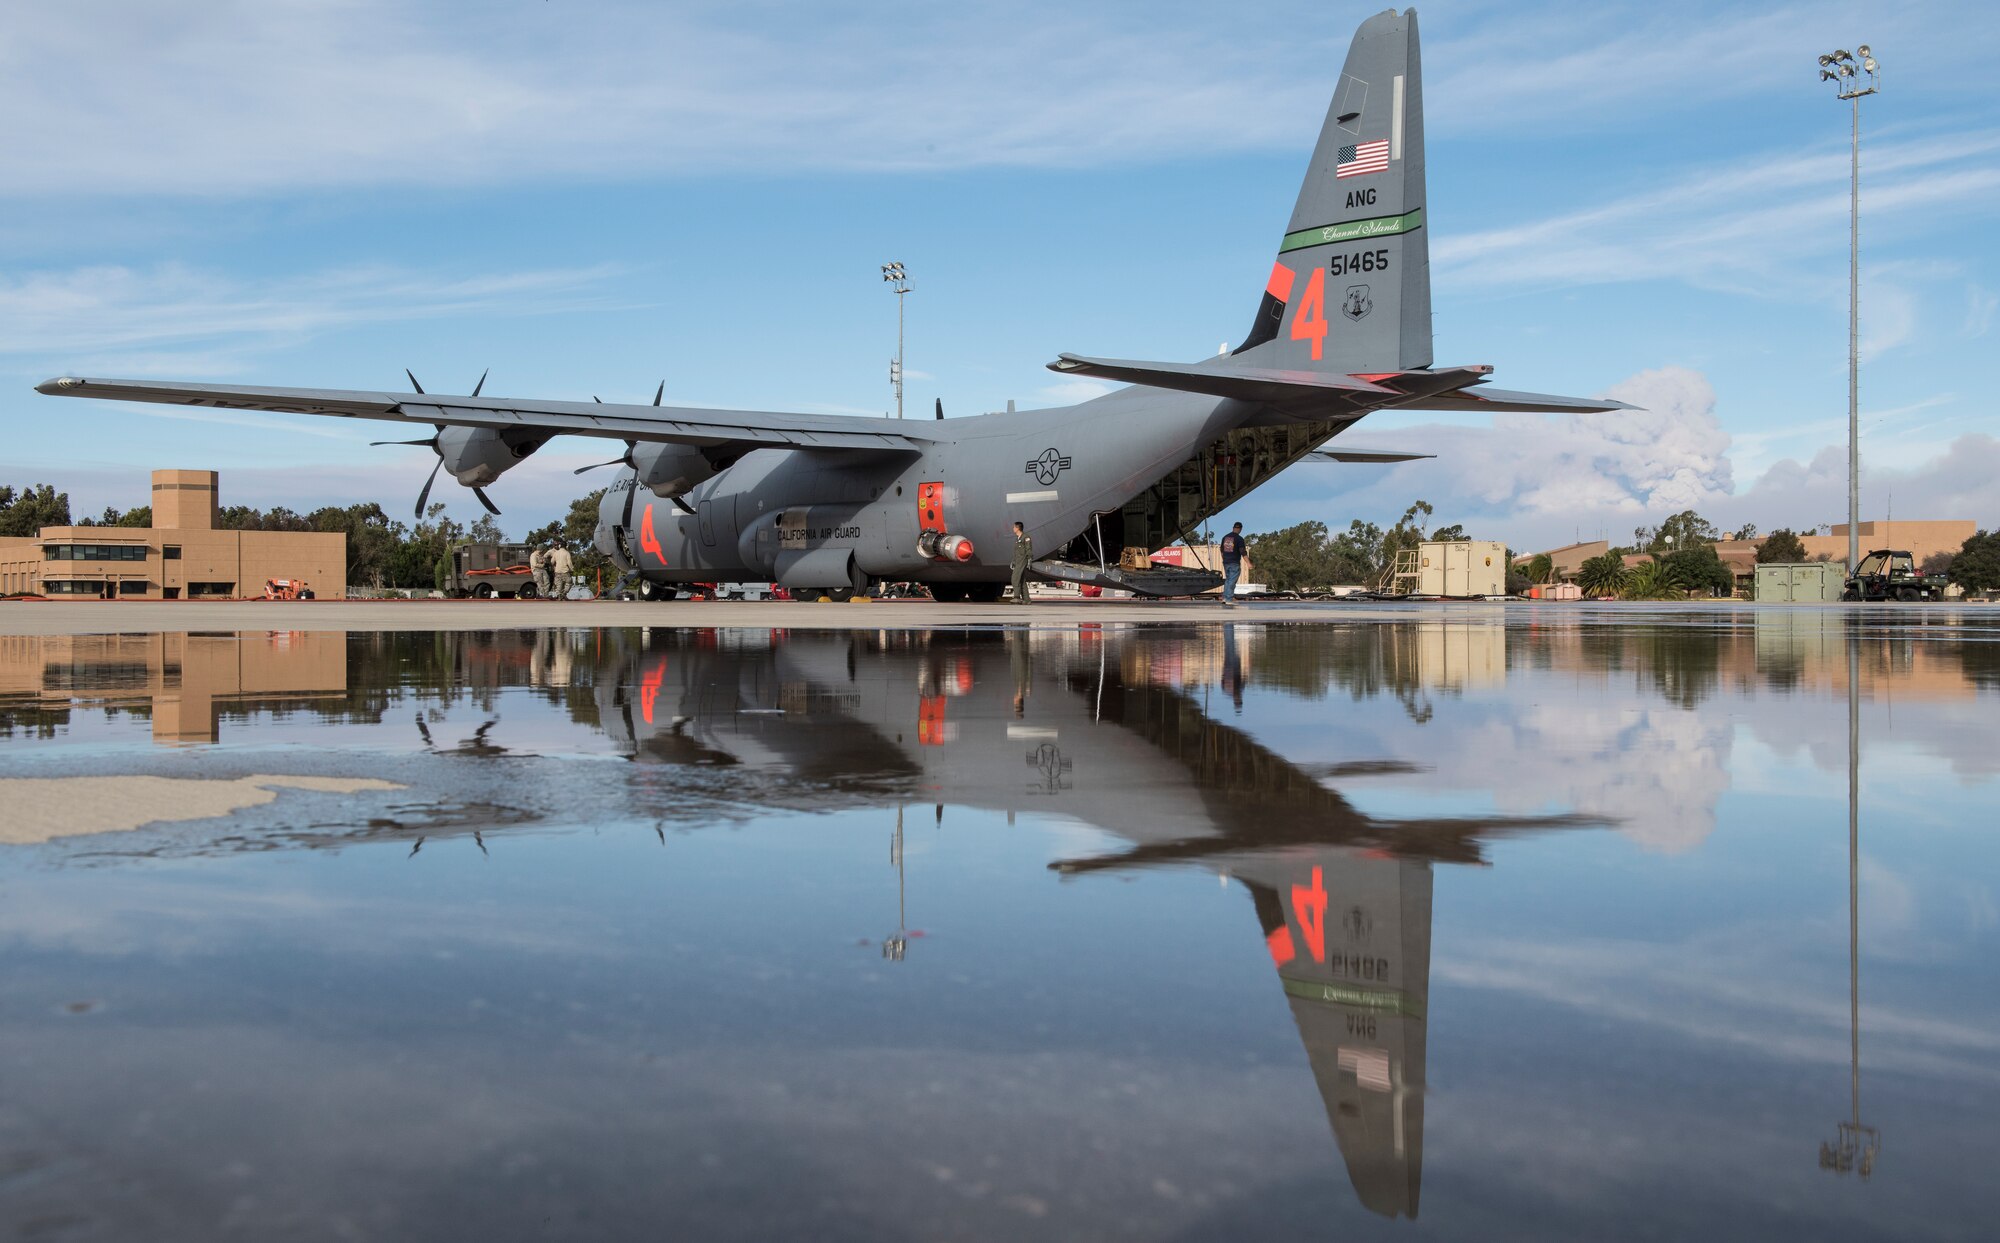 A C-130J Hercules from the 146th Airlift Wing, California Air National Guard, sits on the flightline at Channel Islands Air National Guard Station as the Thomas Fire burn in the background, Dec. 10, 2017. The 146th was activated to support CAL FIRE with wildfire suppression efforts within the state. The C-130s here are capable of spraying fire retardant from a modular airborne firefighting systems loaded in the cargo bay. (U.S. Air Force photo/Master Sgt. Brian Ferguson)